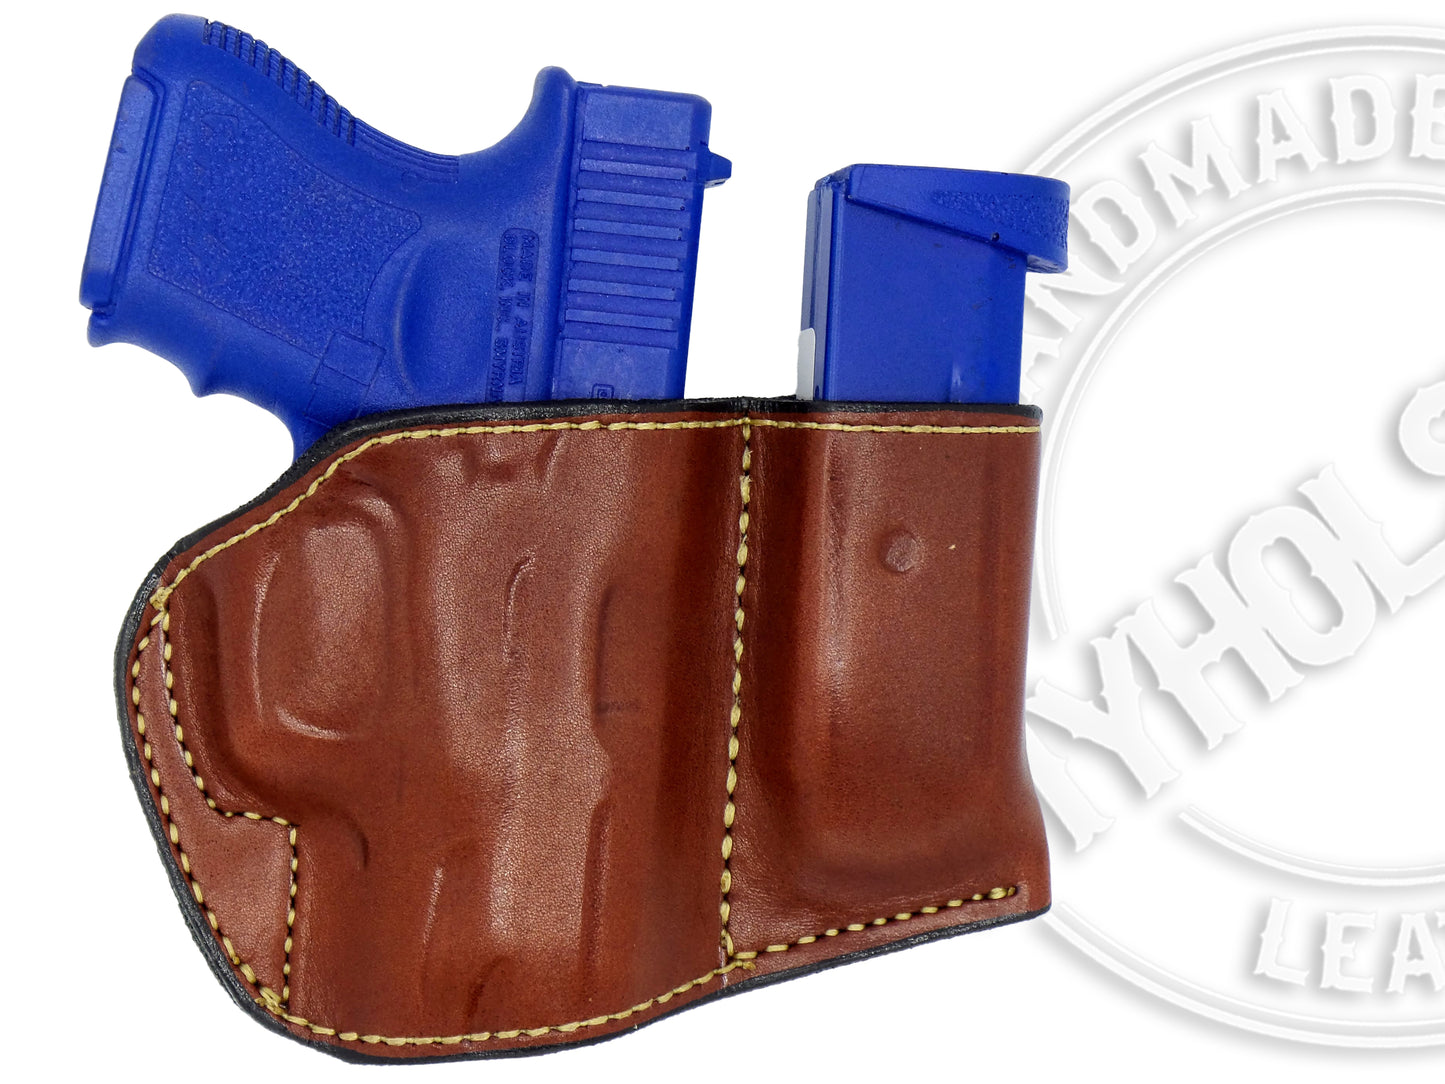 GLOCK 42 Holster and Mag Pouch Combo - OWB Leather Belt Holster